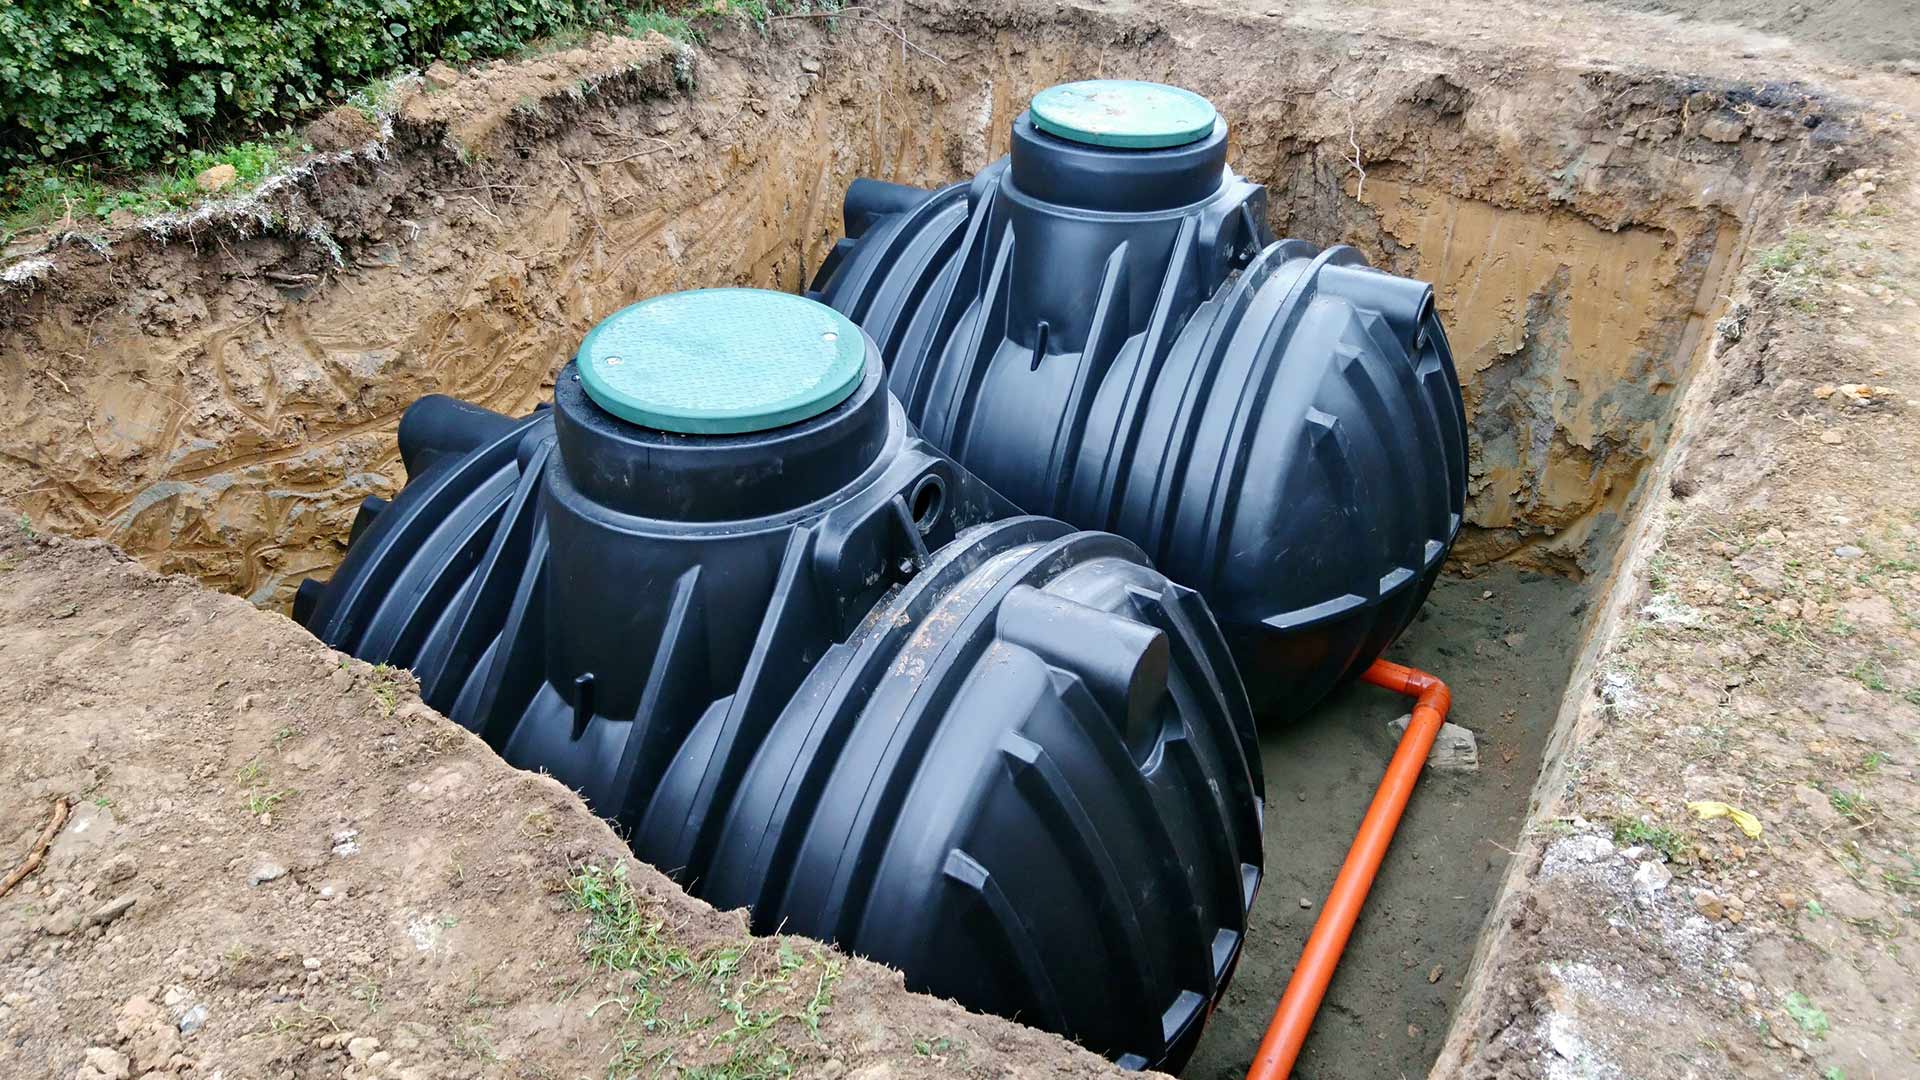 Clearwater Septic Tank Pumping, Potable Water Delivery and Portable Toilet Rentals